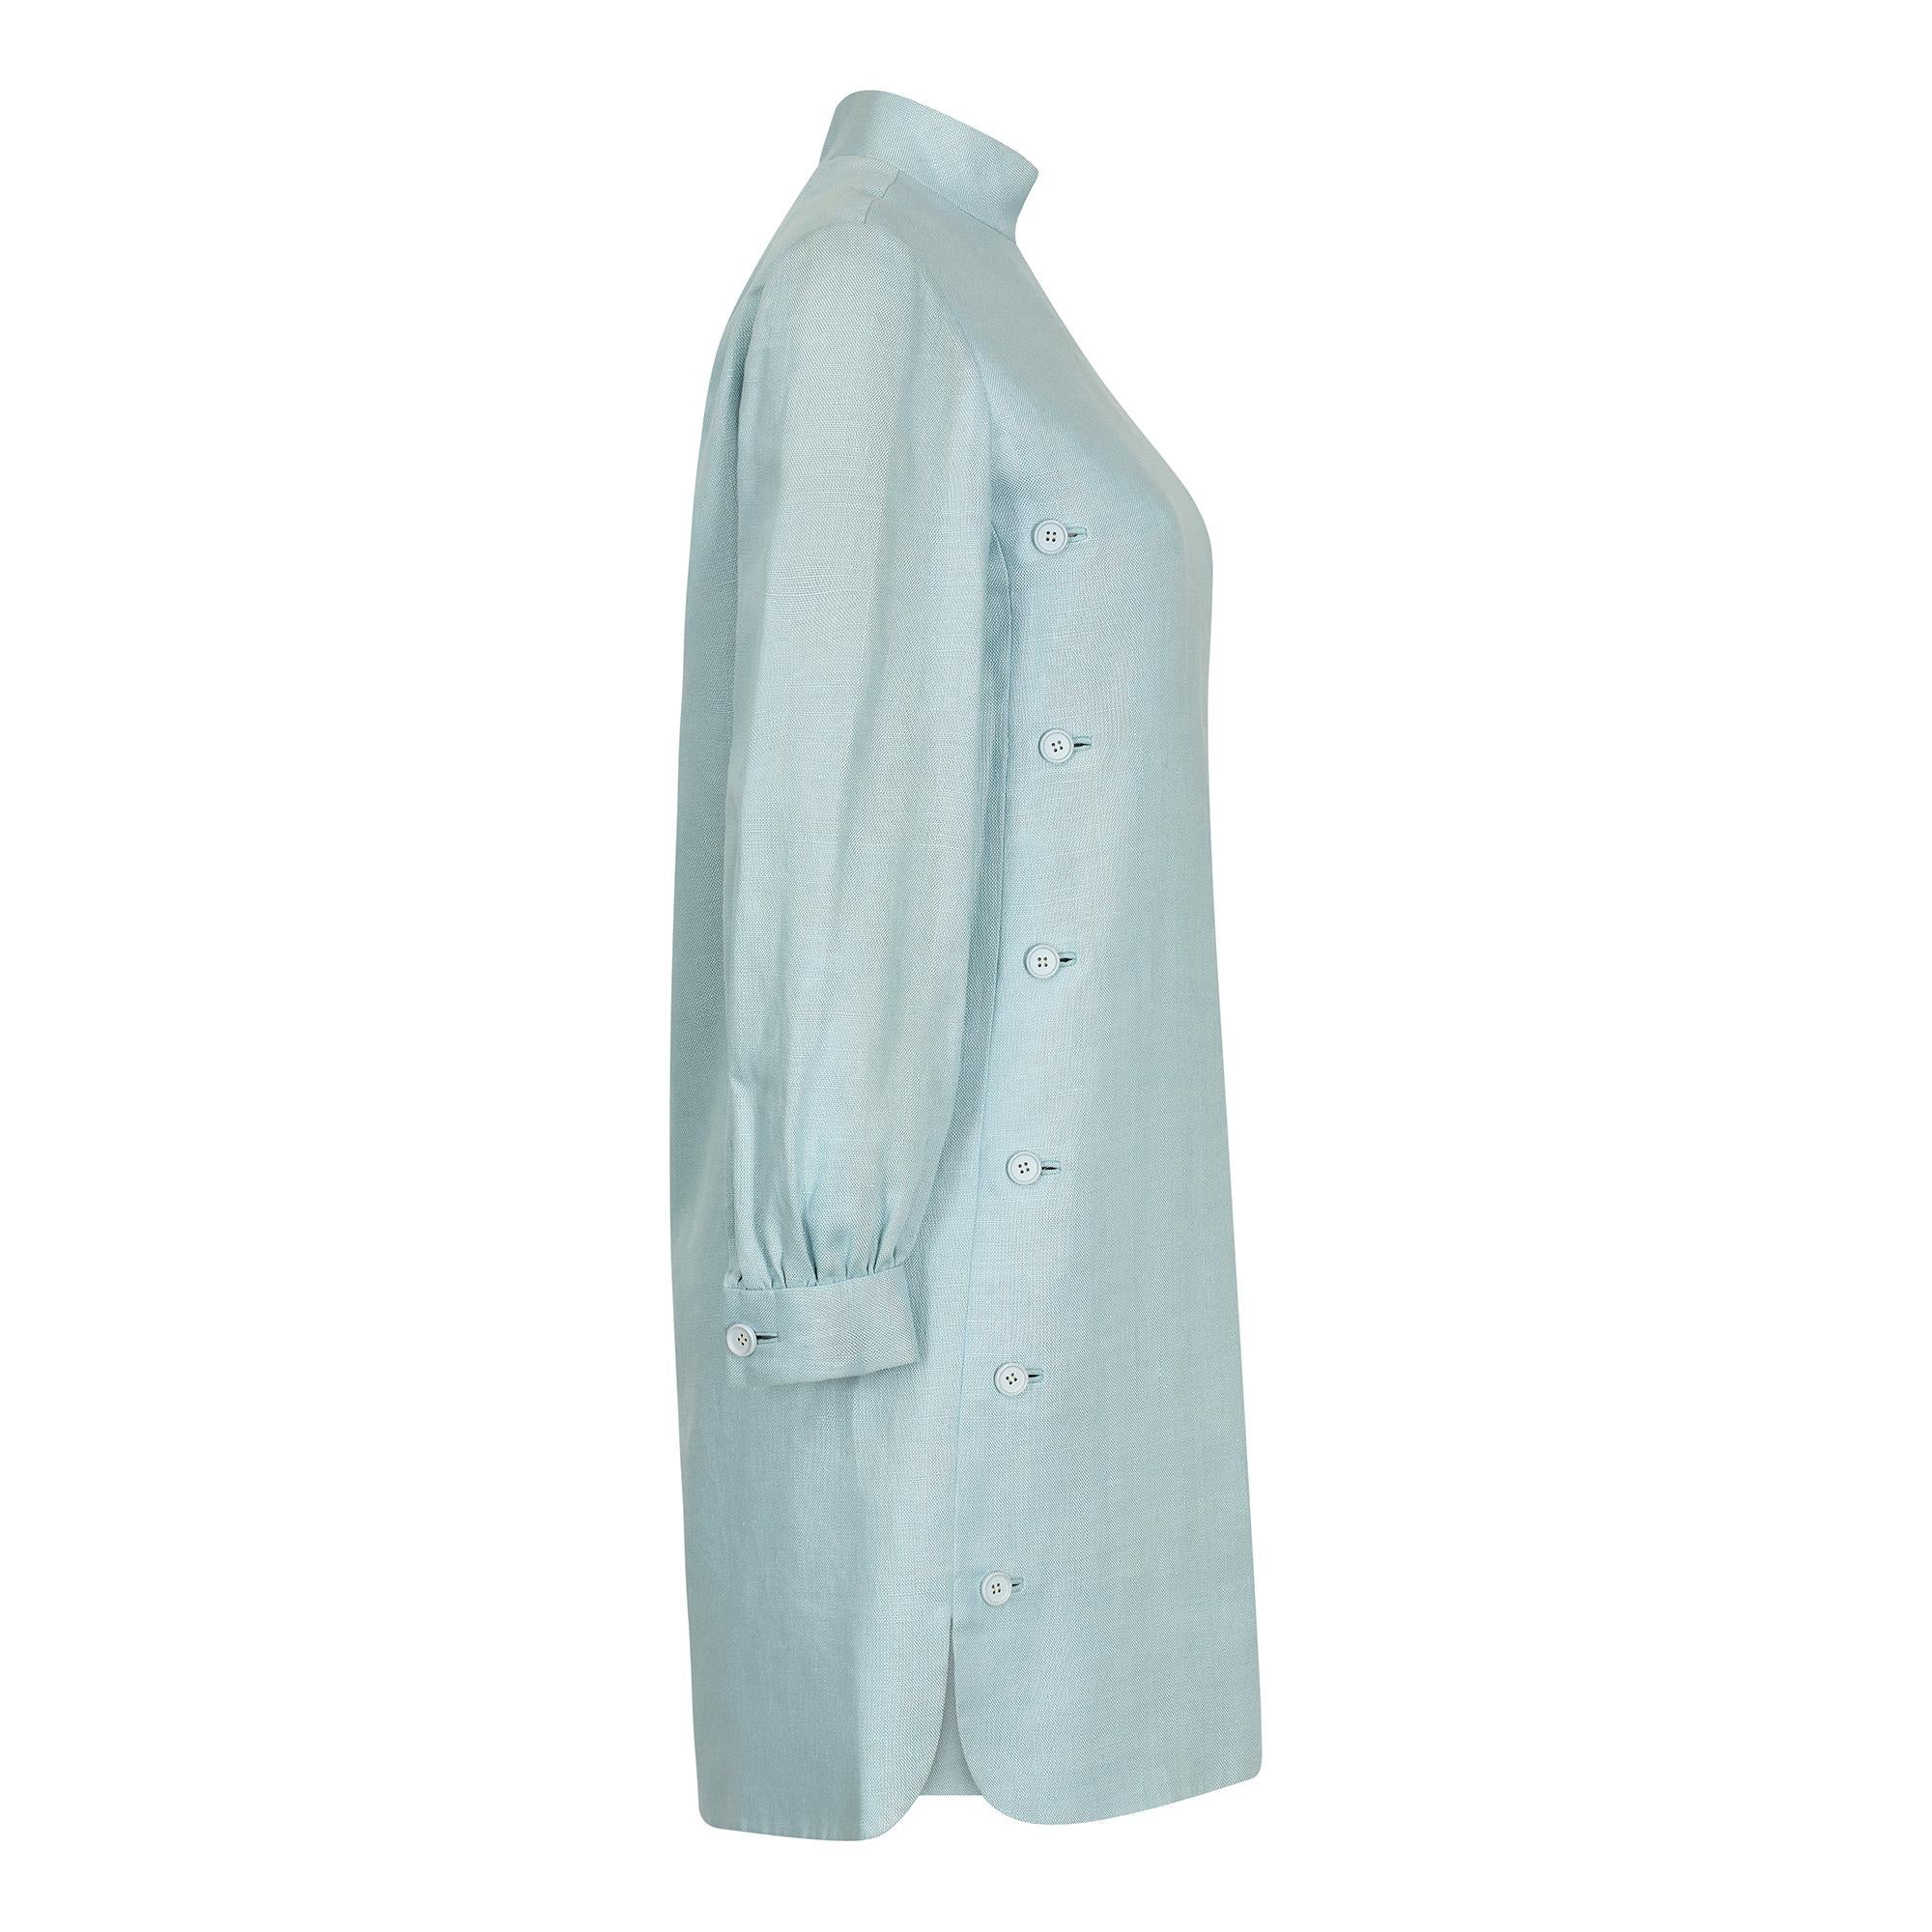 This baby blue 1960s Mod style dress is by the New York designer Geoffrey Beene; celebrated for his craftsmanship, attention to detail and relaxed wearable designs. This classic 60s piece marries two design elements in the tunic-like appearance of